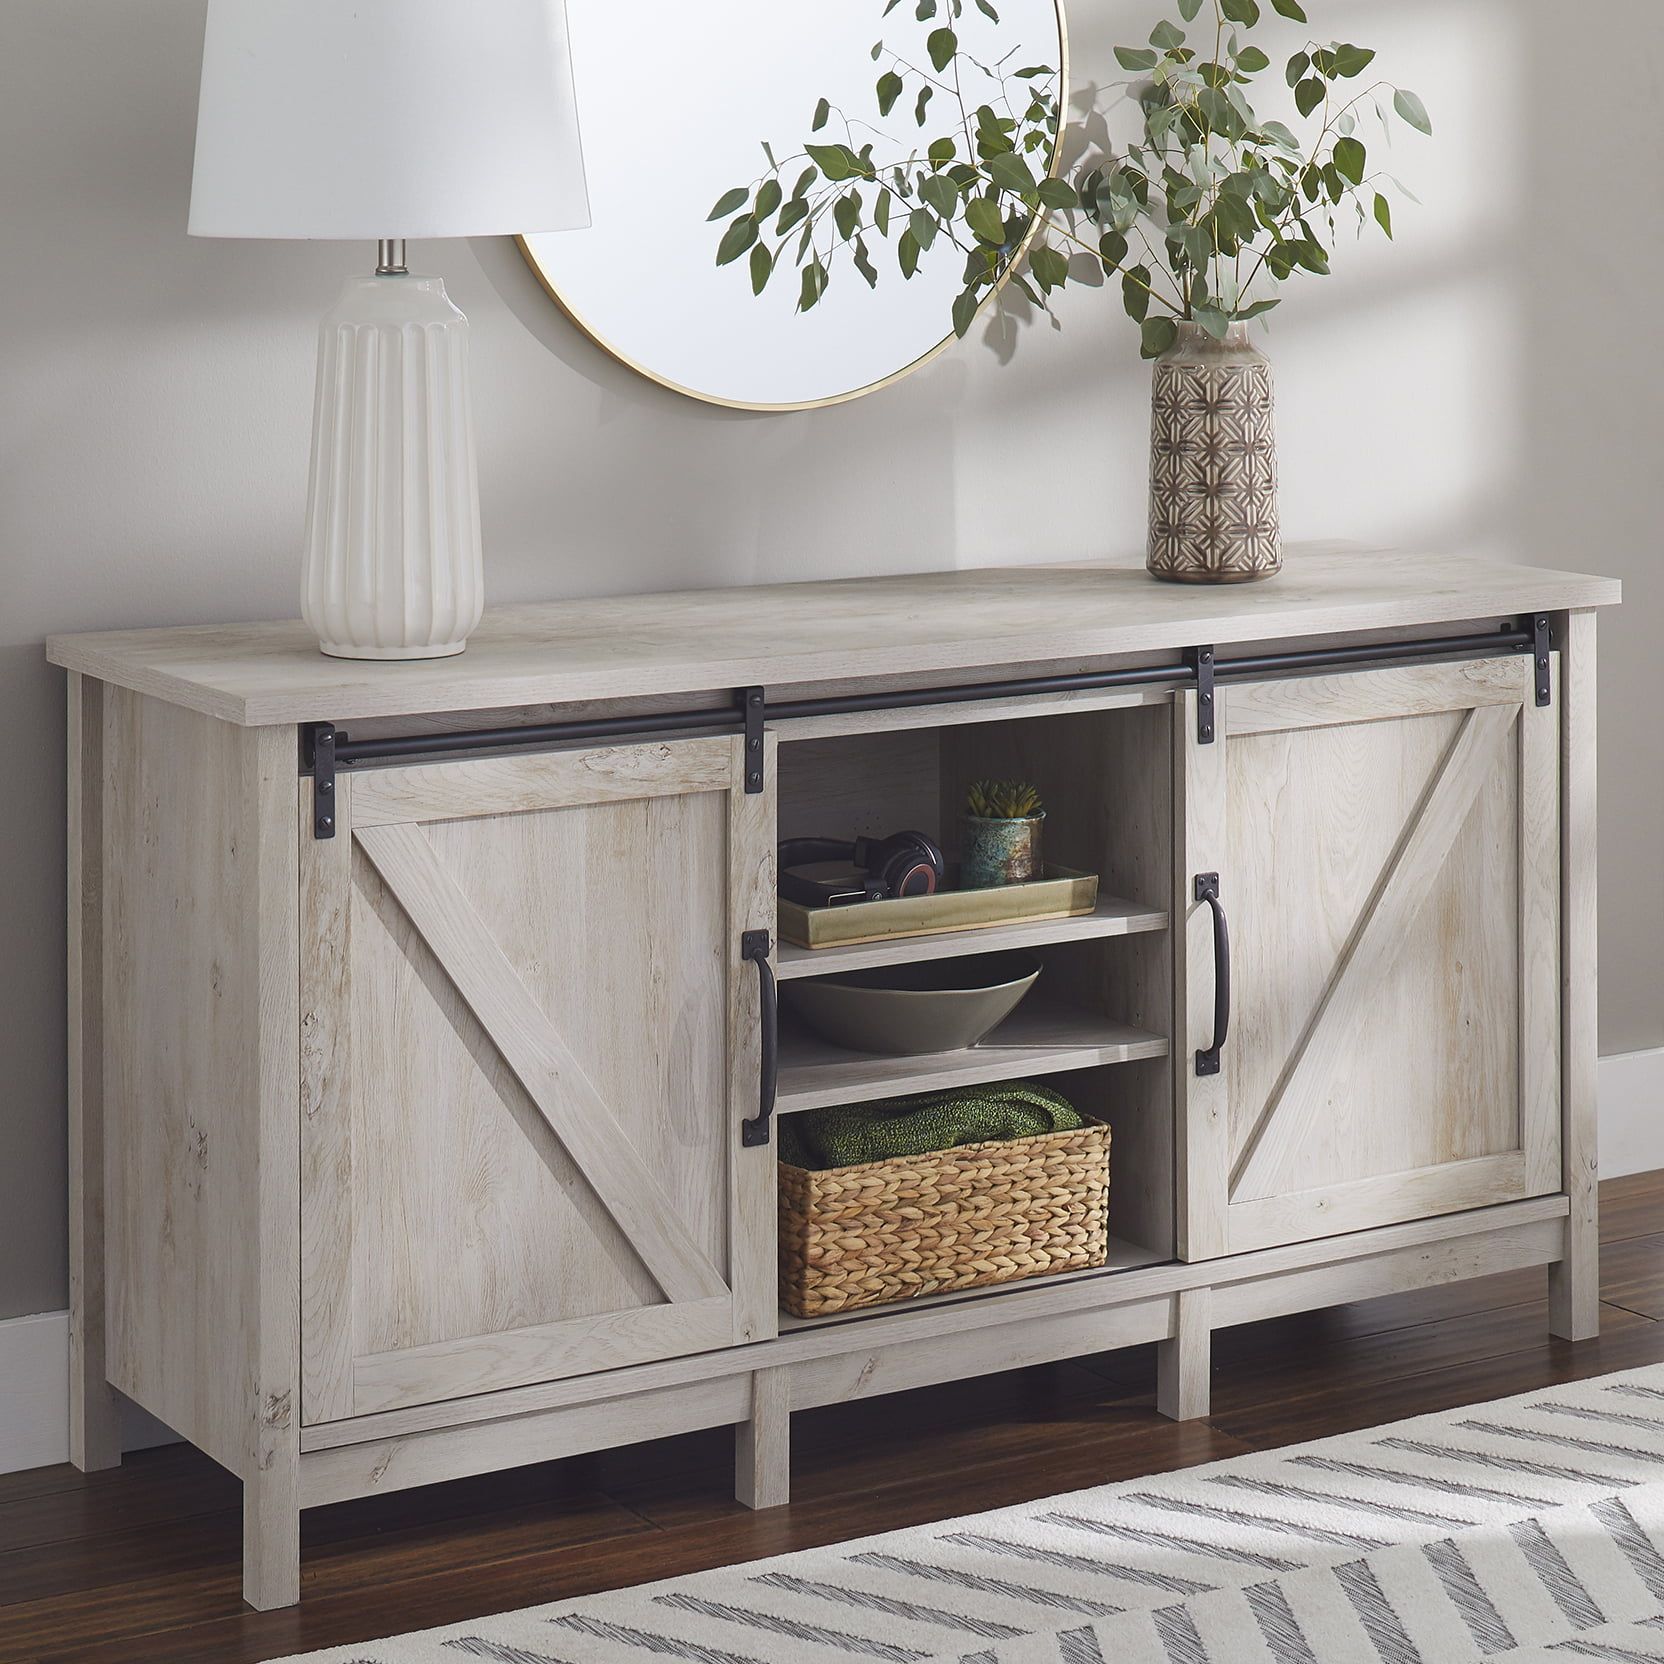 Better Homes & Gardens Modern Farmhouse Tv Stand For Tvs Up To 70 Inside Modern Farmhouse Rustic Tv Stands (View 2 of 20)